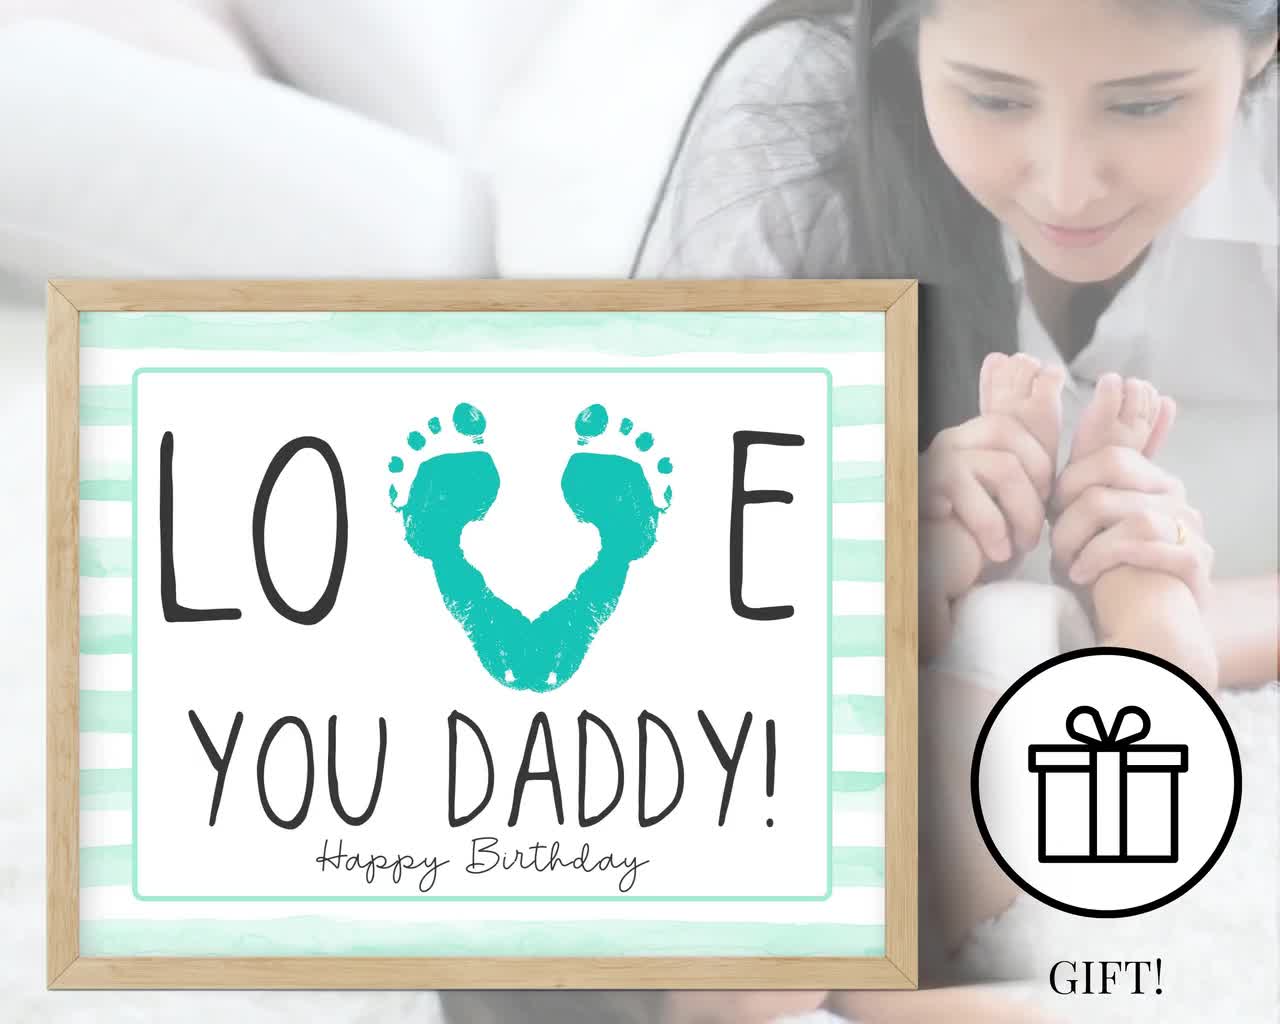 Funny Dads Birthday Gifts Ideas, Novelty Birthday Gifts for Daddy from –  Happypop